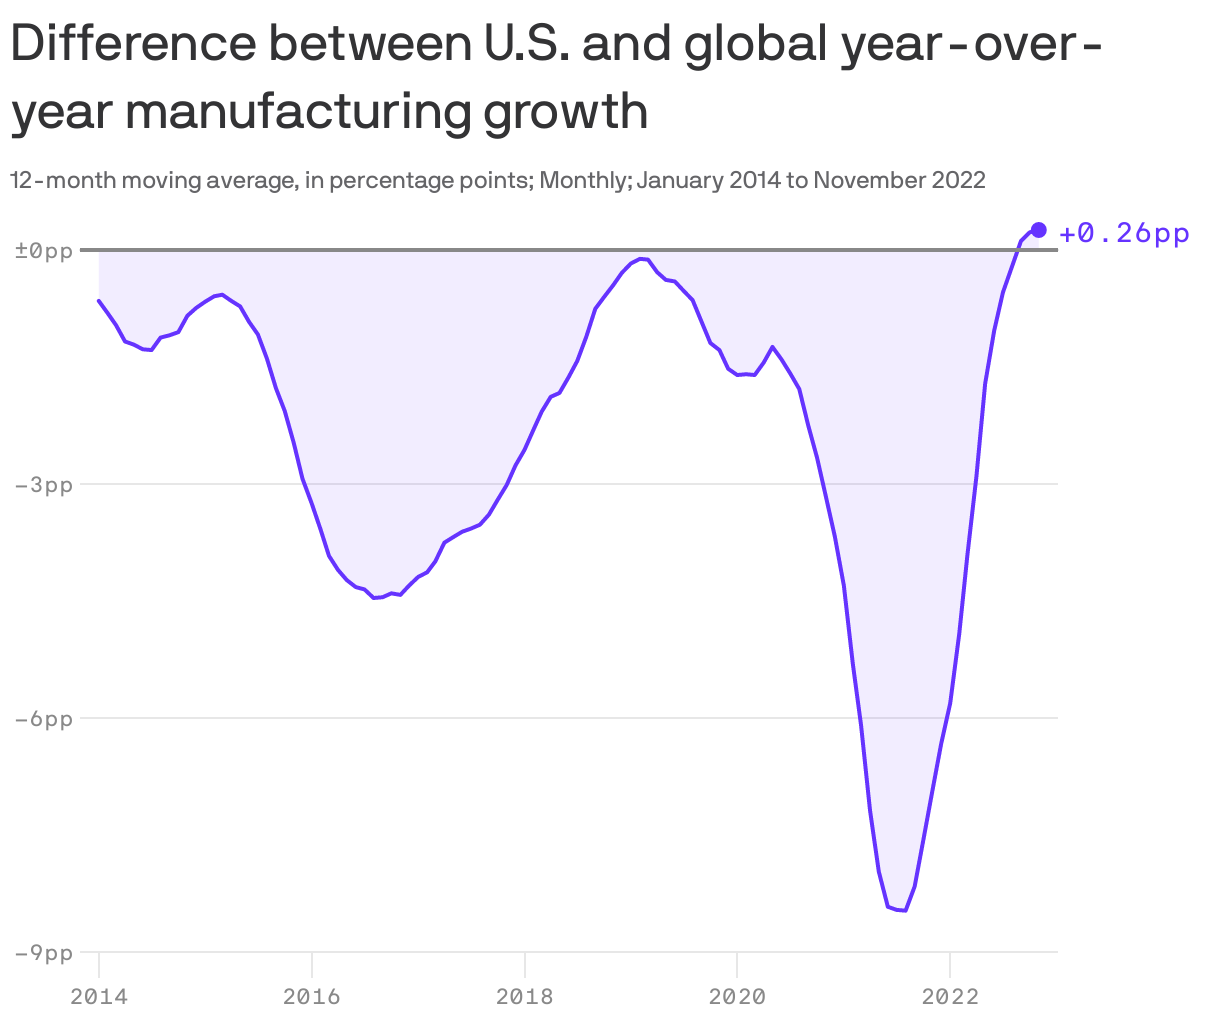 Difference between U.S. and global year-over-year manufacturing growth